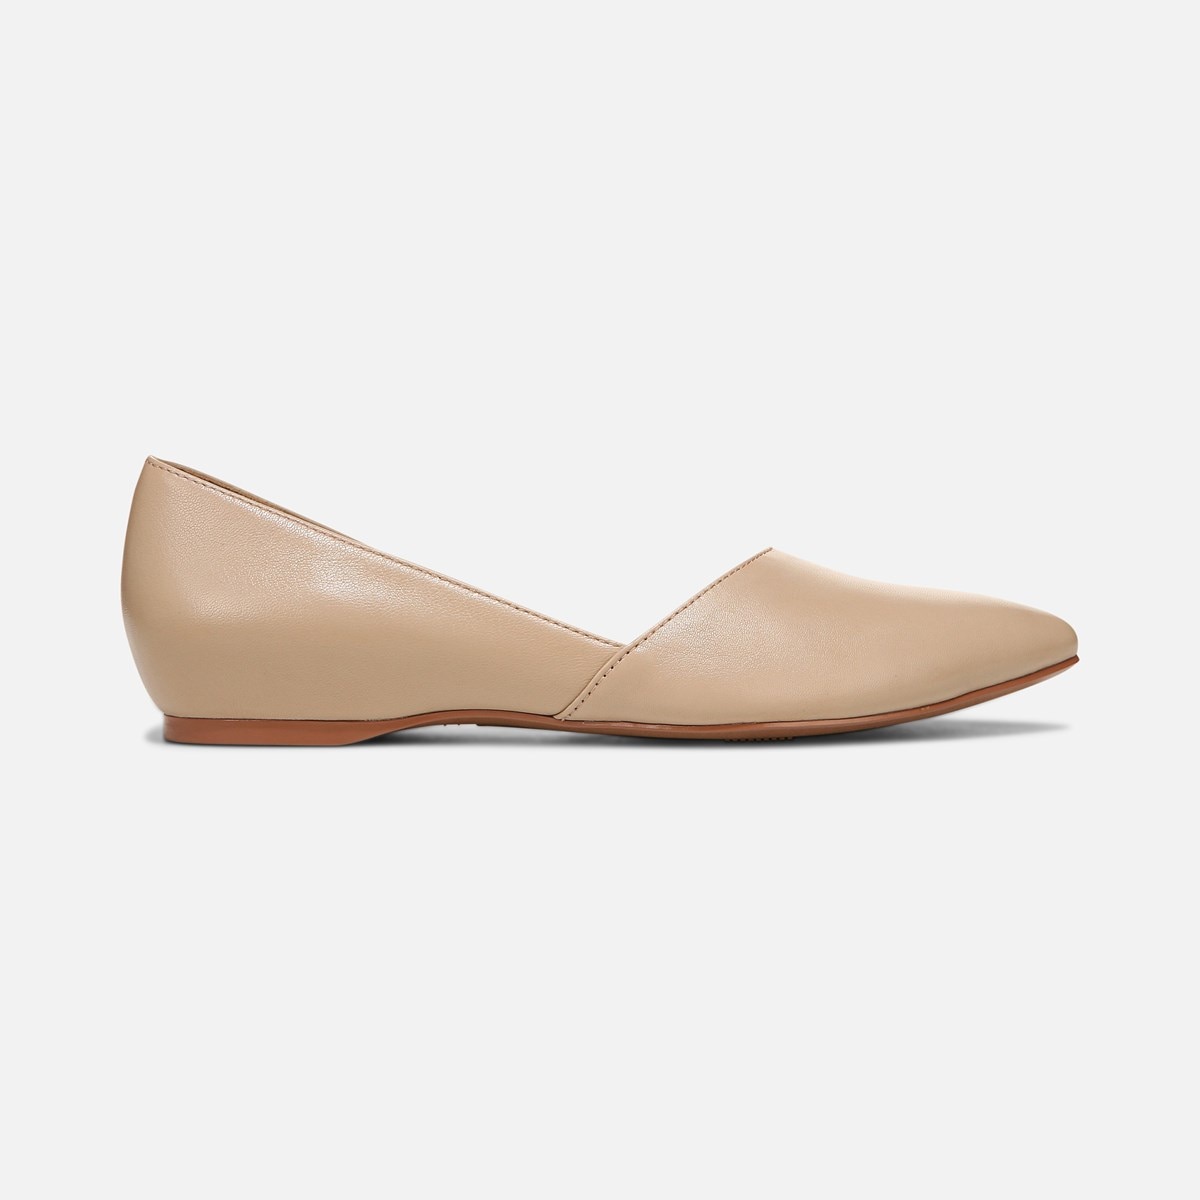 Naturalizer Samantha in Taupe Leather Flats